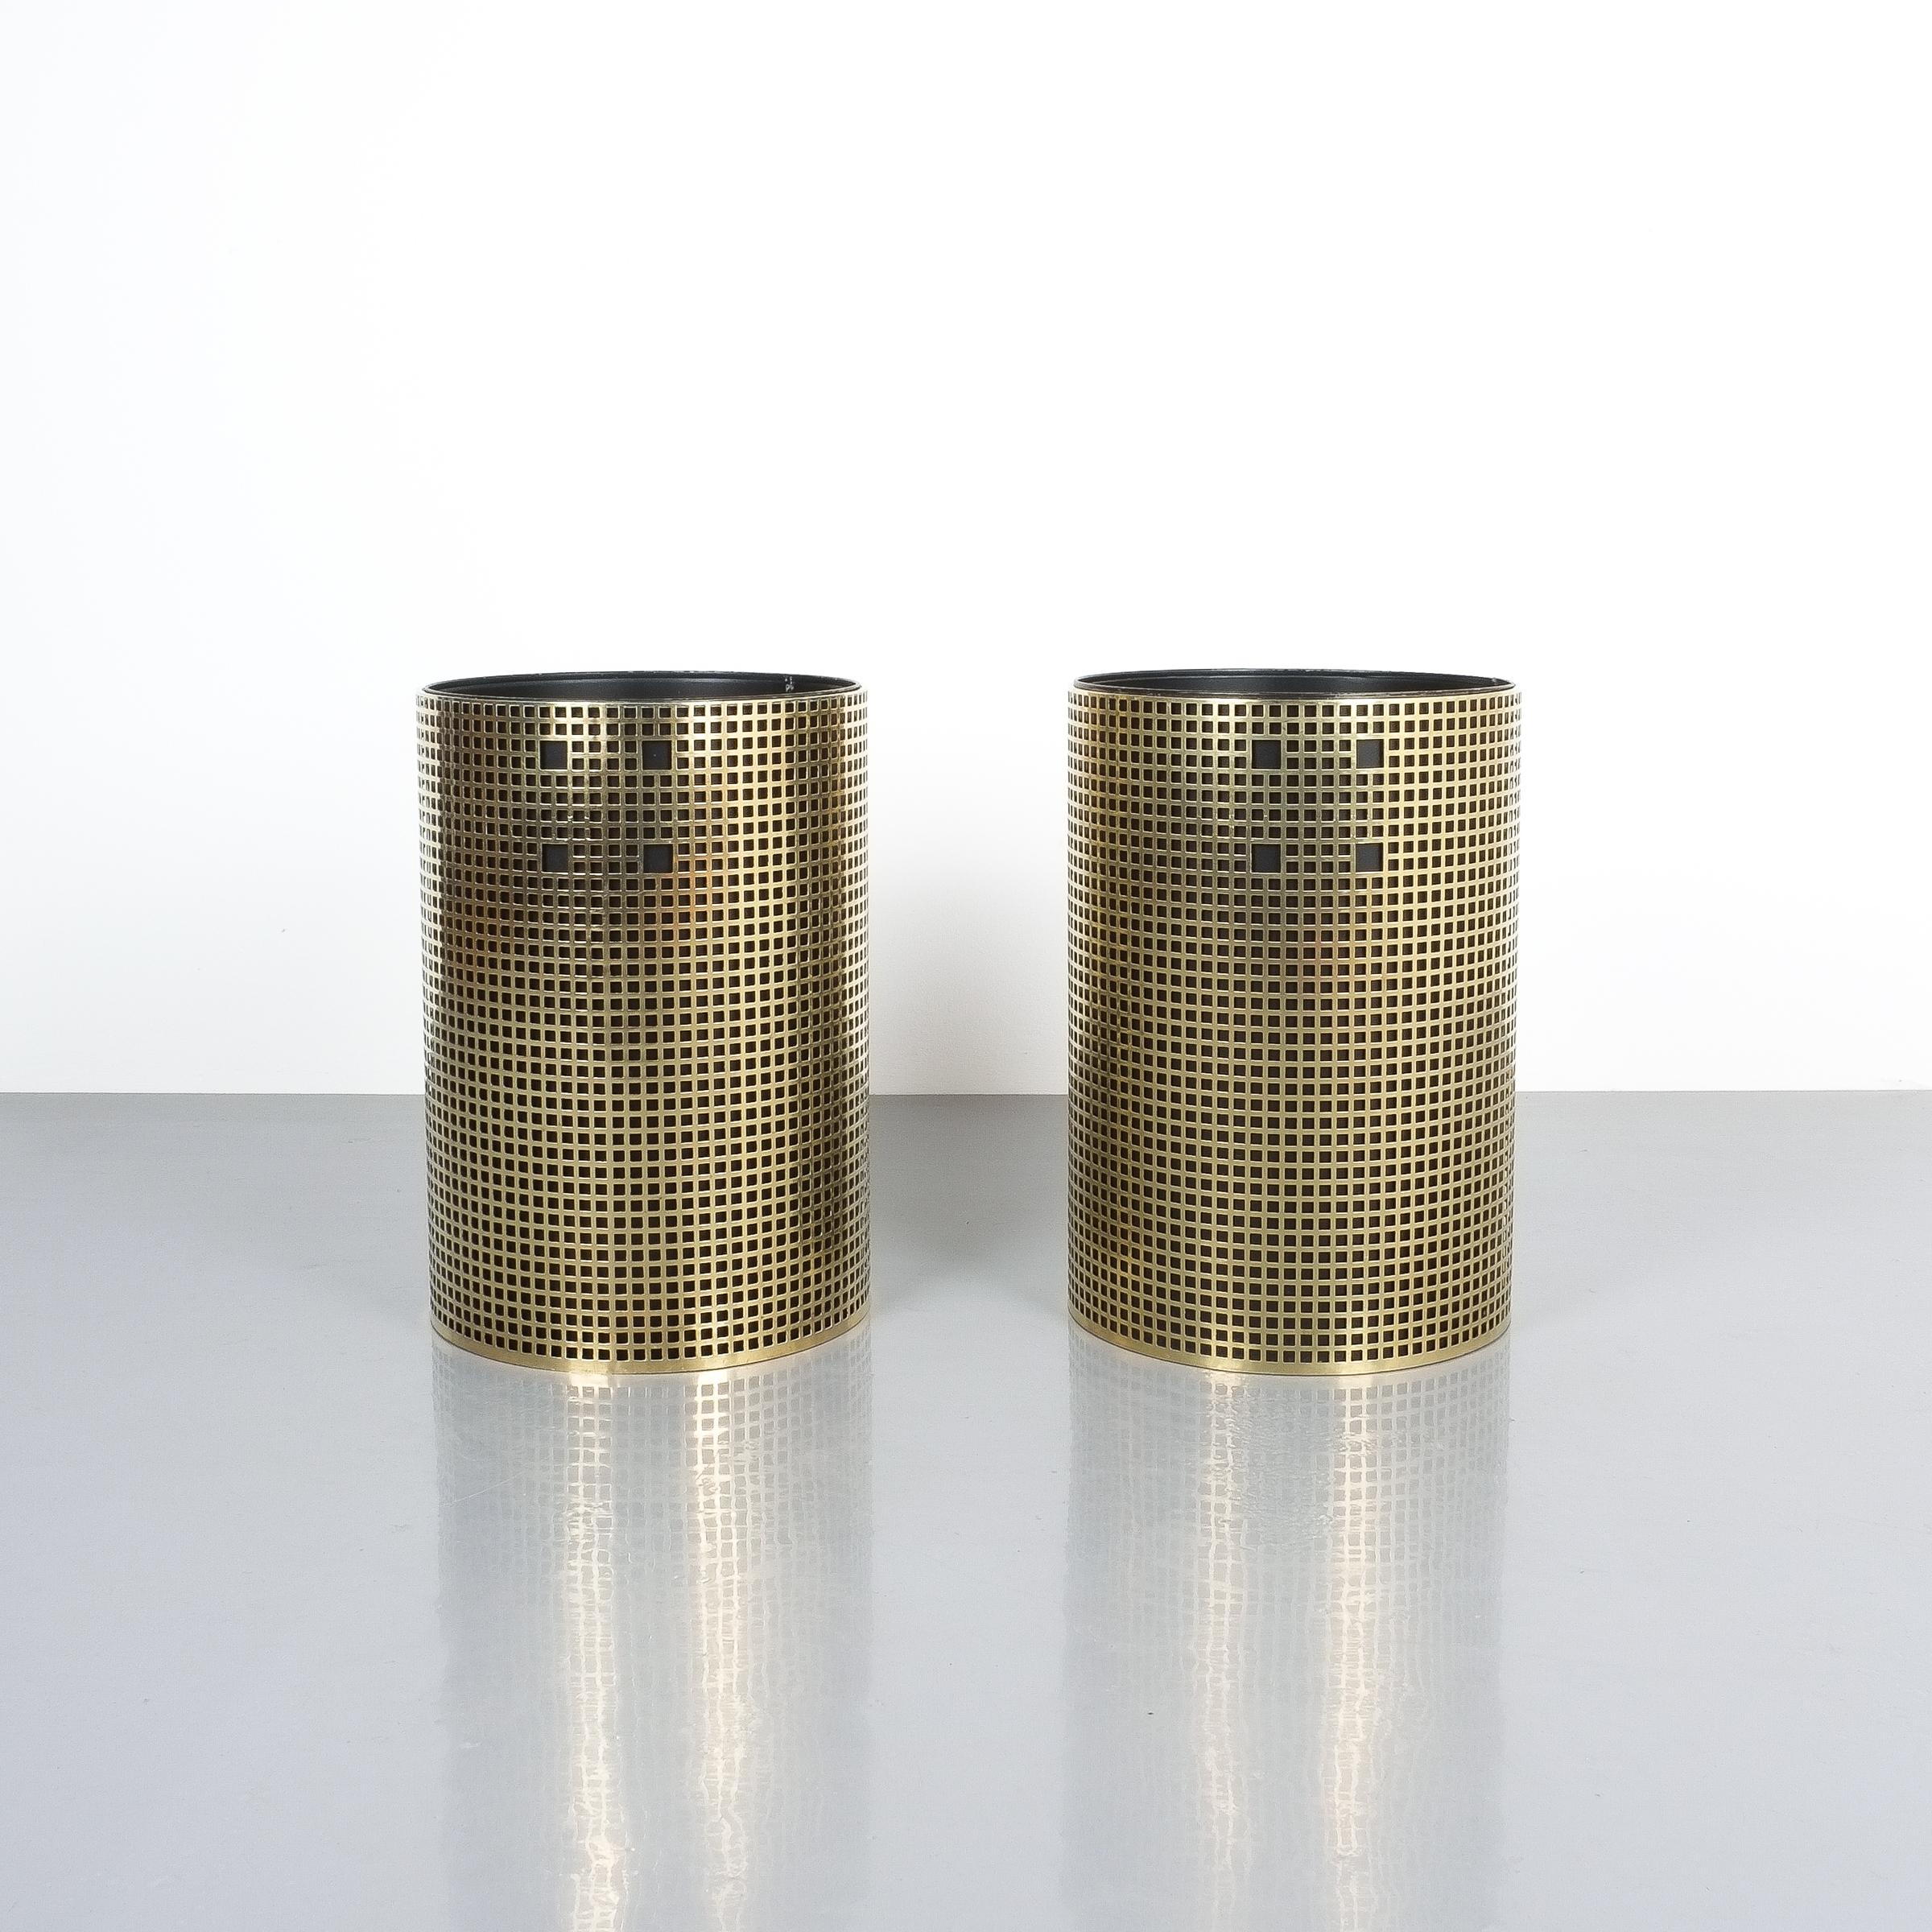 Pair of refurbished Josef Hoffmann style trashcans, waste paper baskets or trash bins, Austria, 1950. Brass cage with black metal insert. 11“ x 15.74“. Very good refurbished condition, newly polished brass.